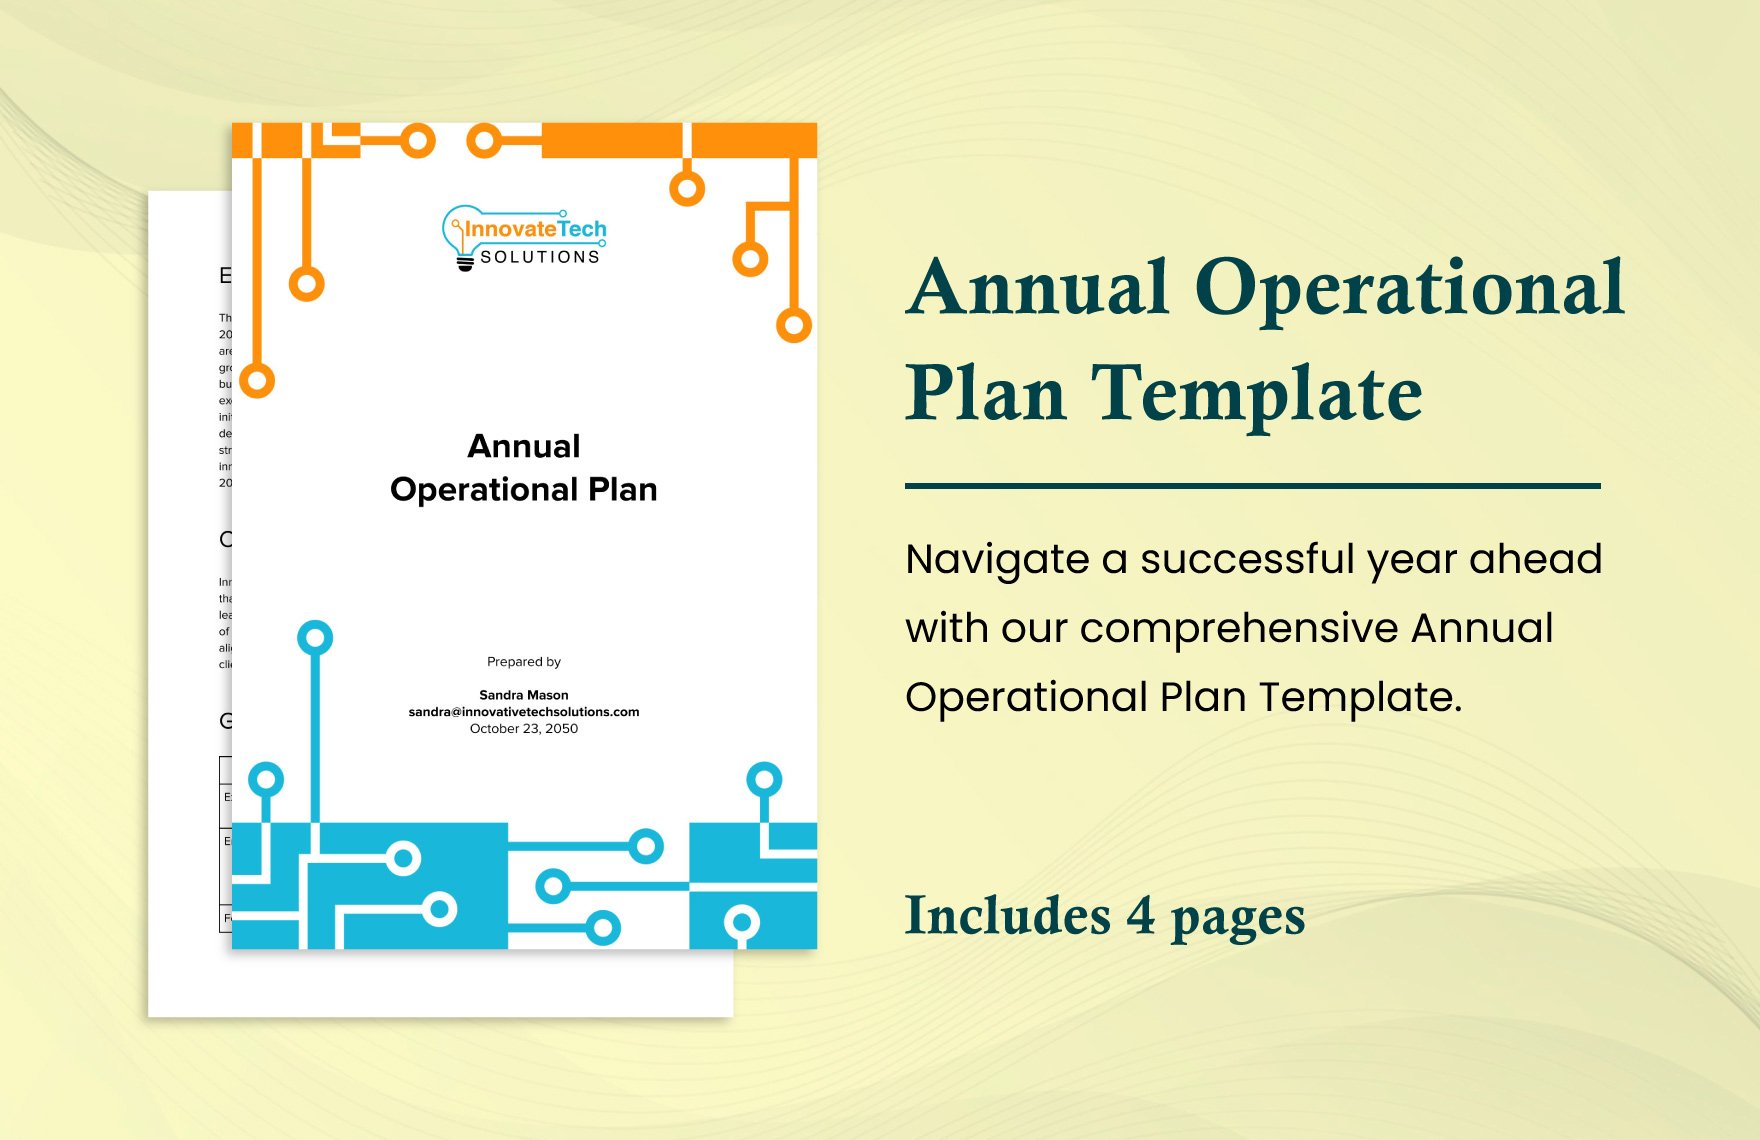 Annual Operational Plan Template